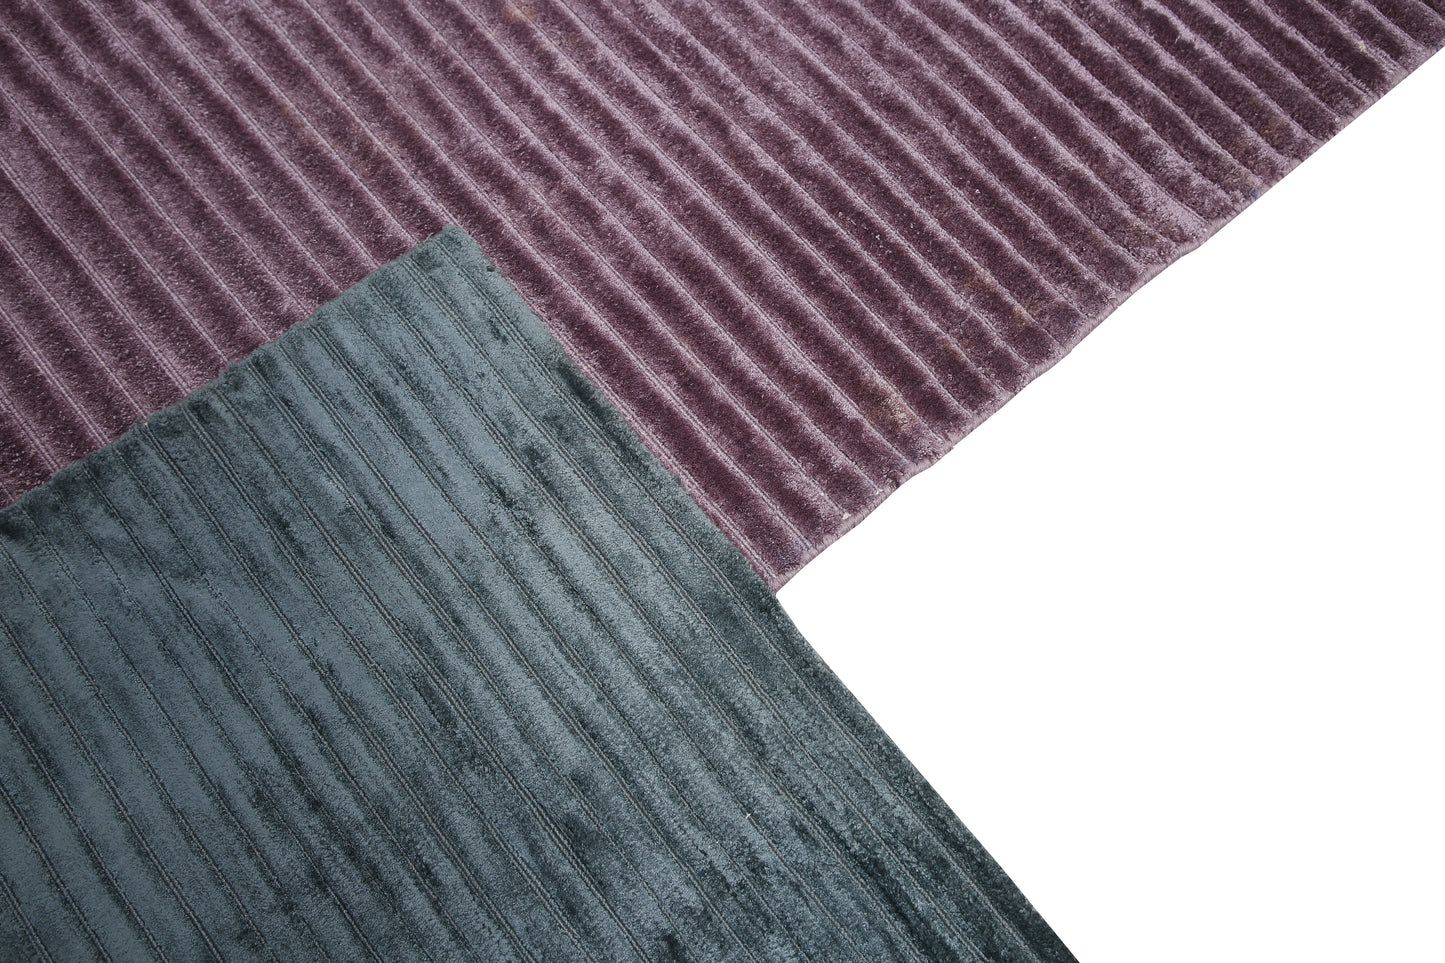 Aria Rug - French Violet